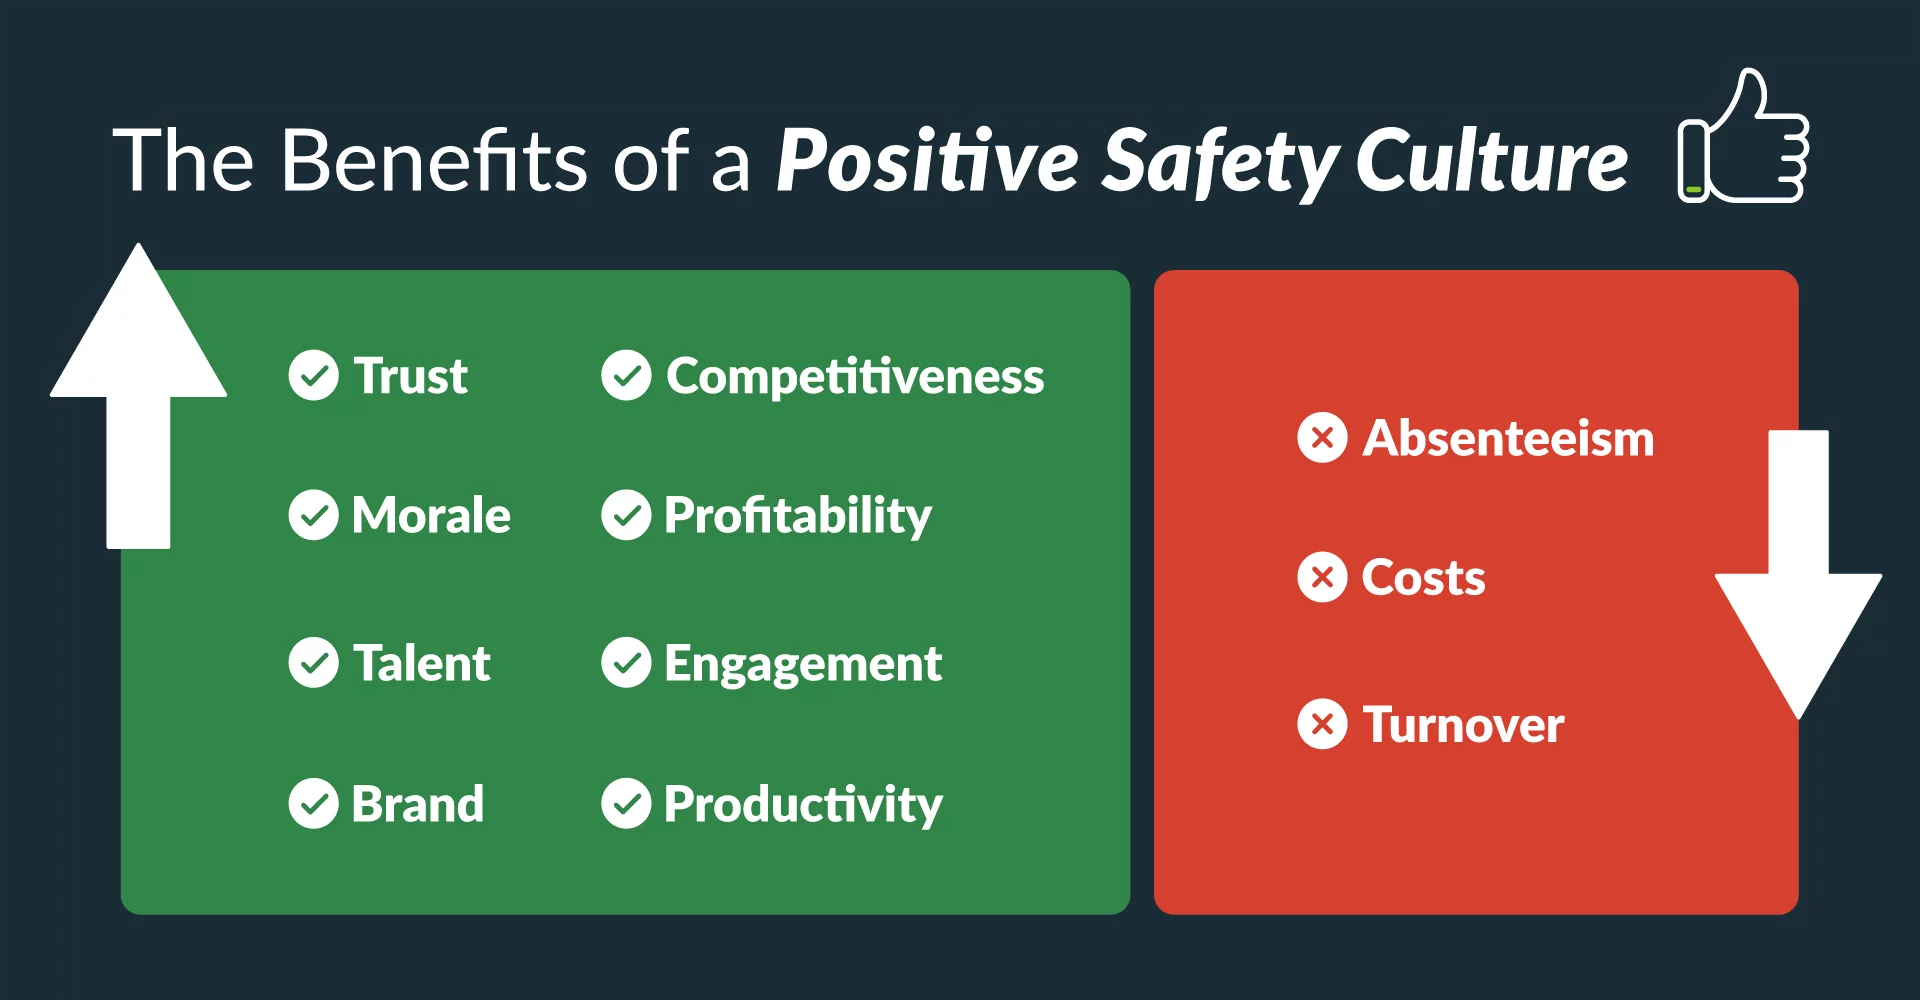 Benefits of a positive safety culture in the workplace